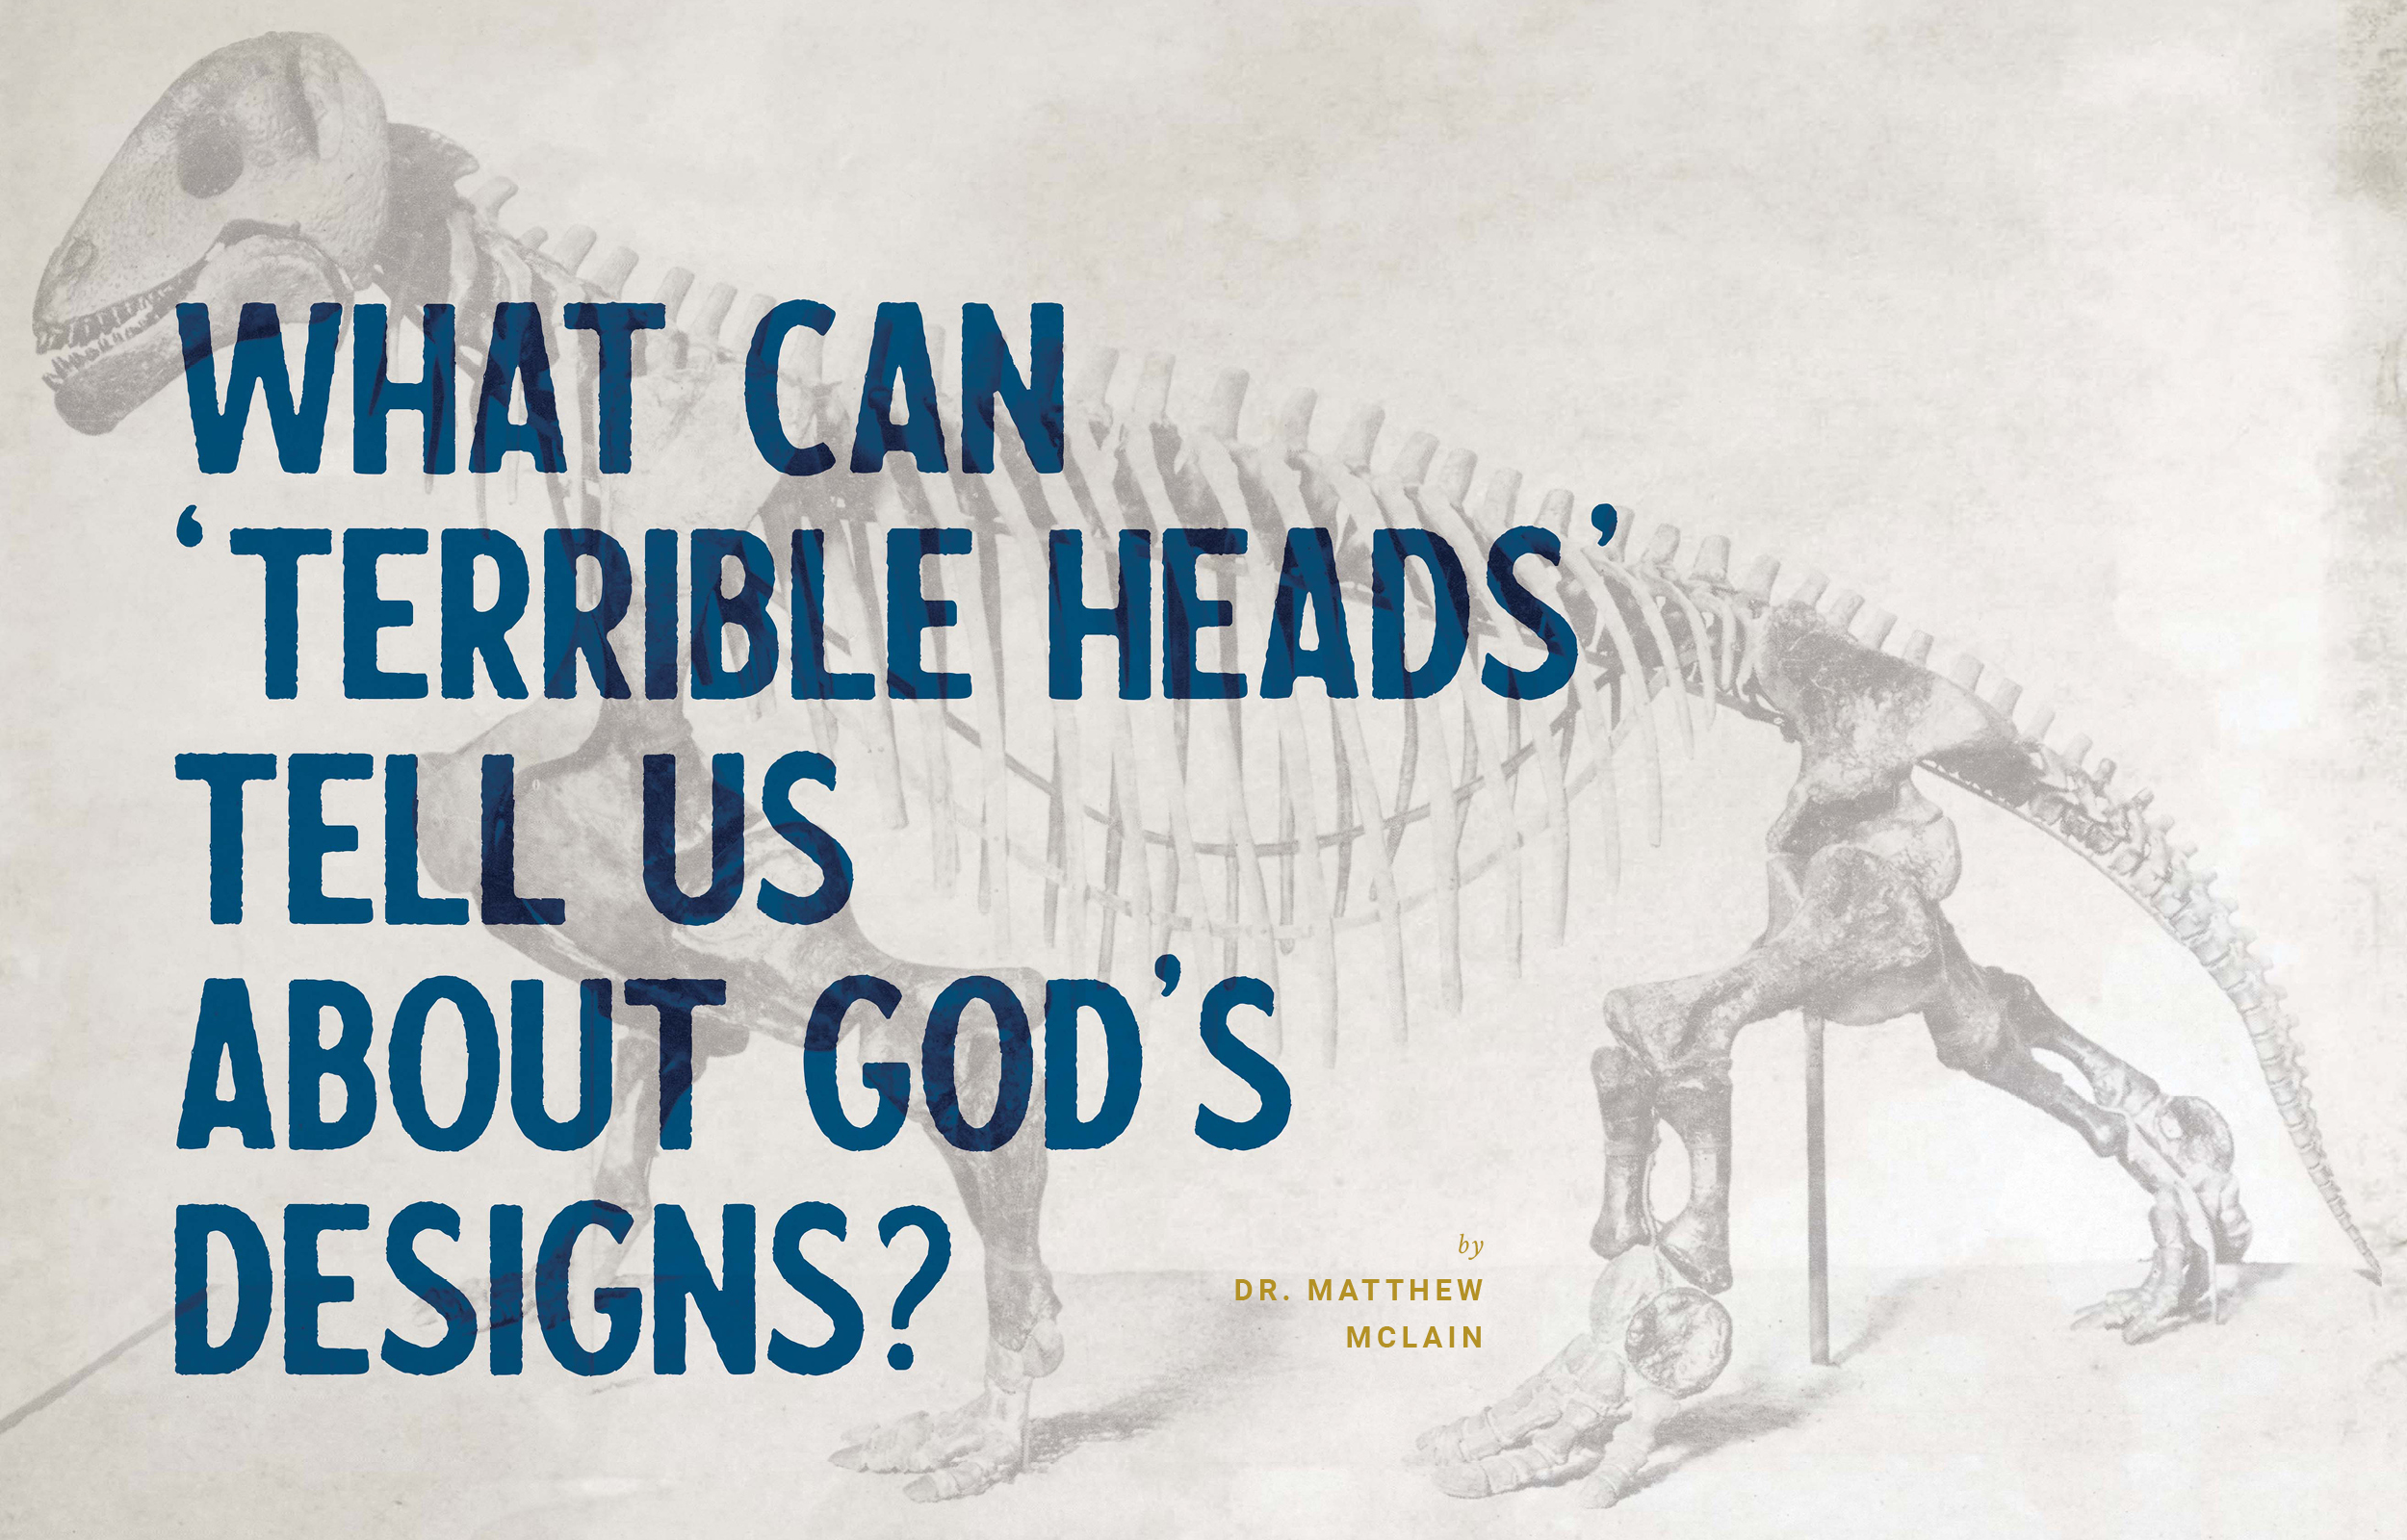 What Can 'Terrible Heads' Tell us About God's Designs?